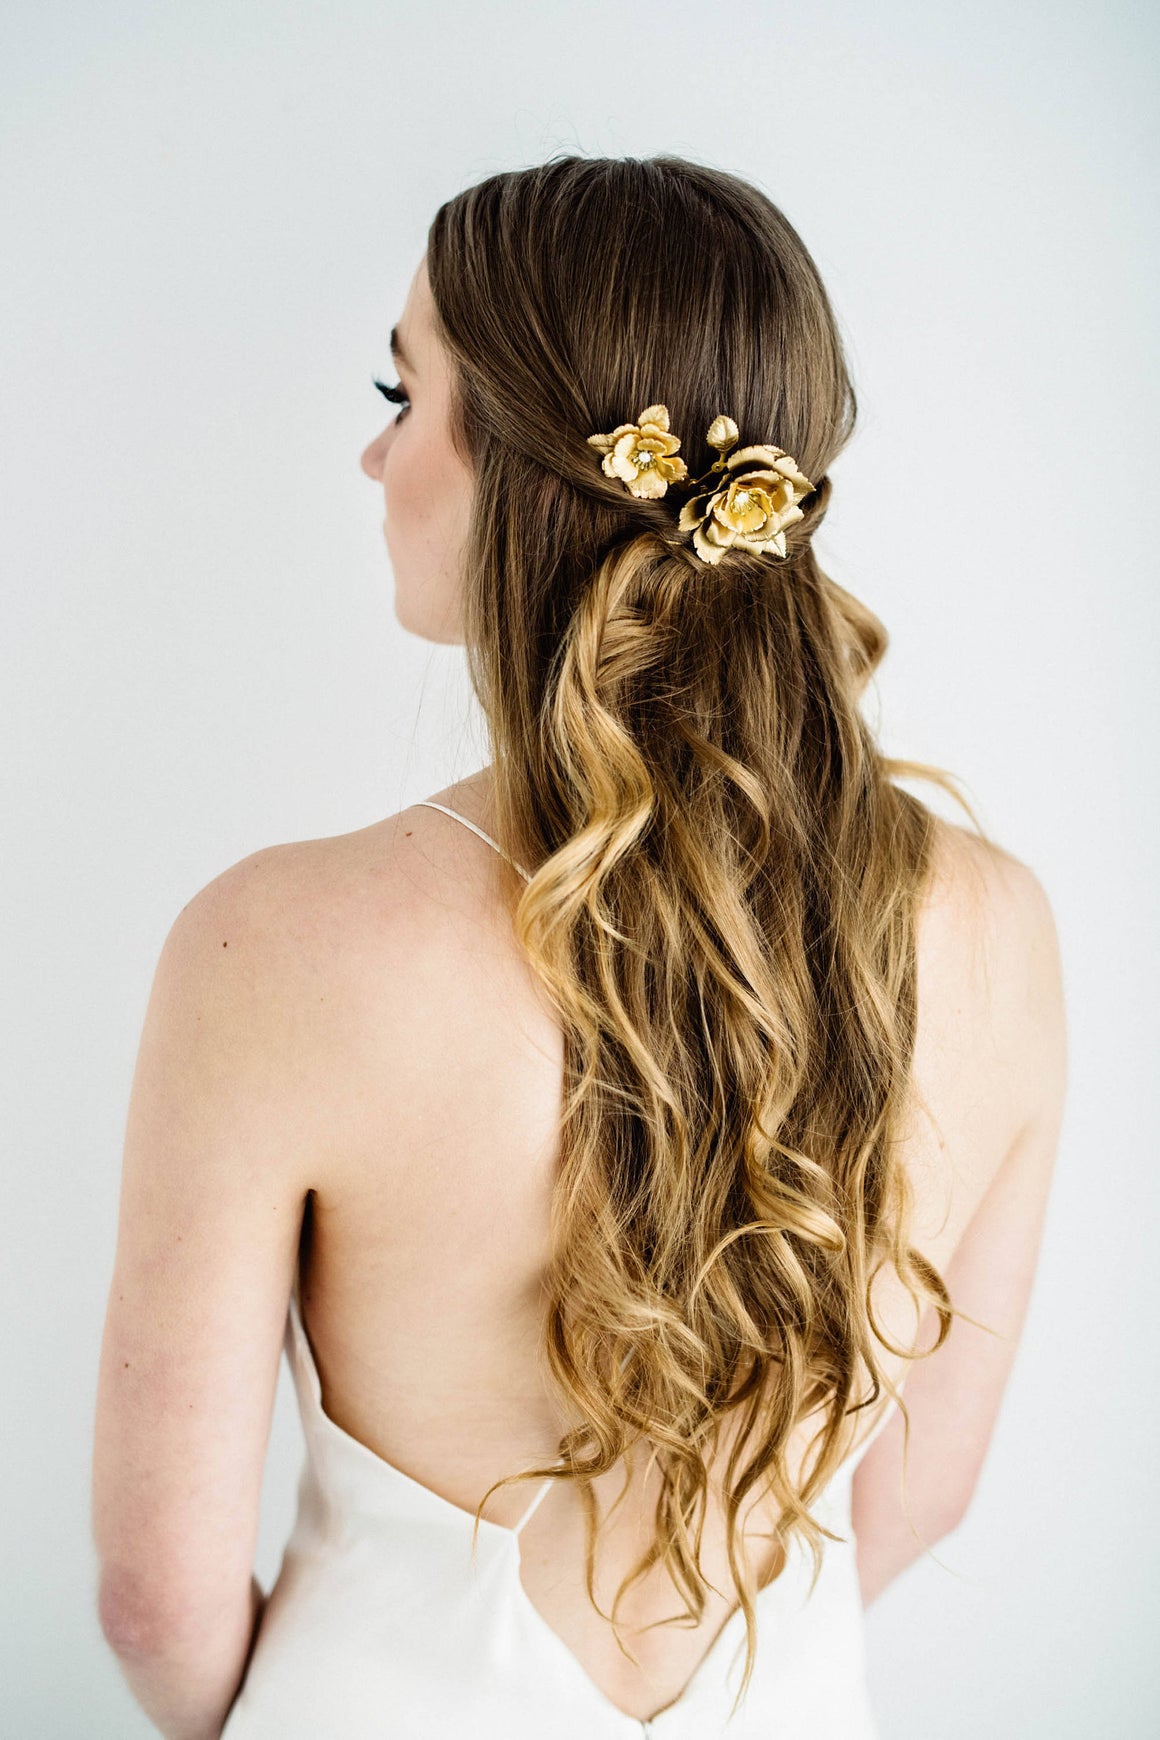 Bride wearing a bridal hair comb made of gold flowers